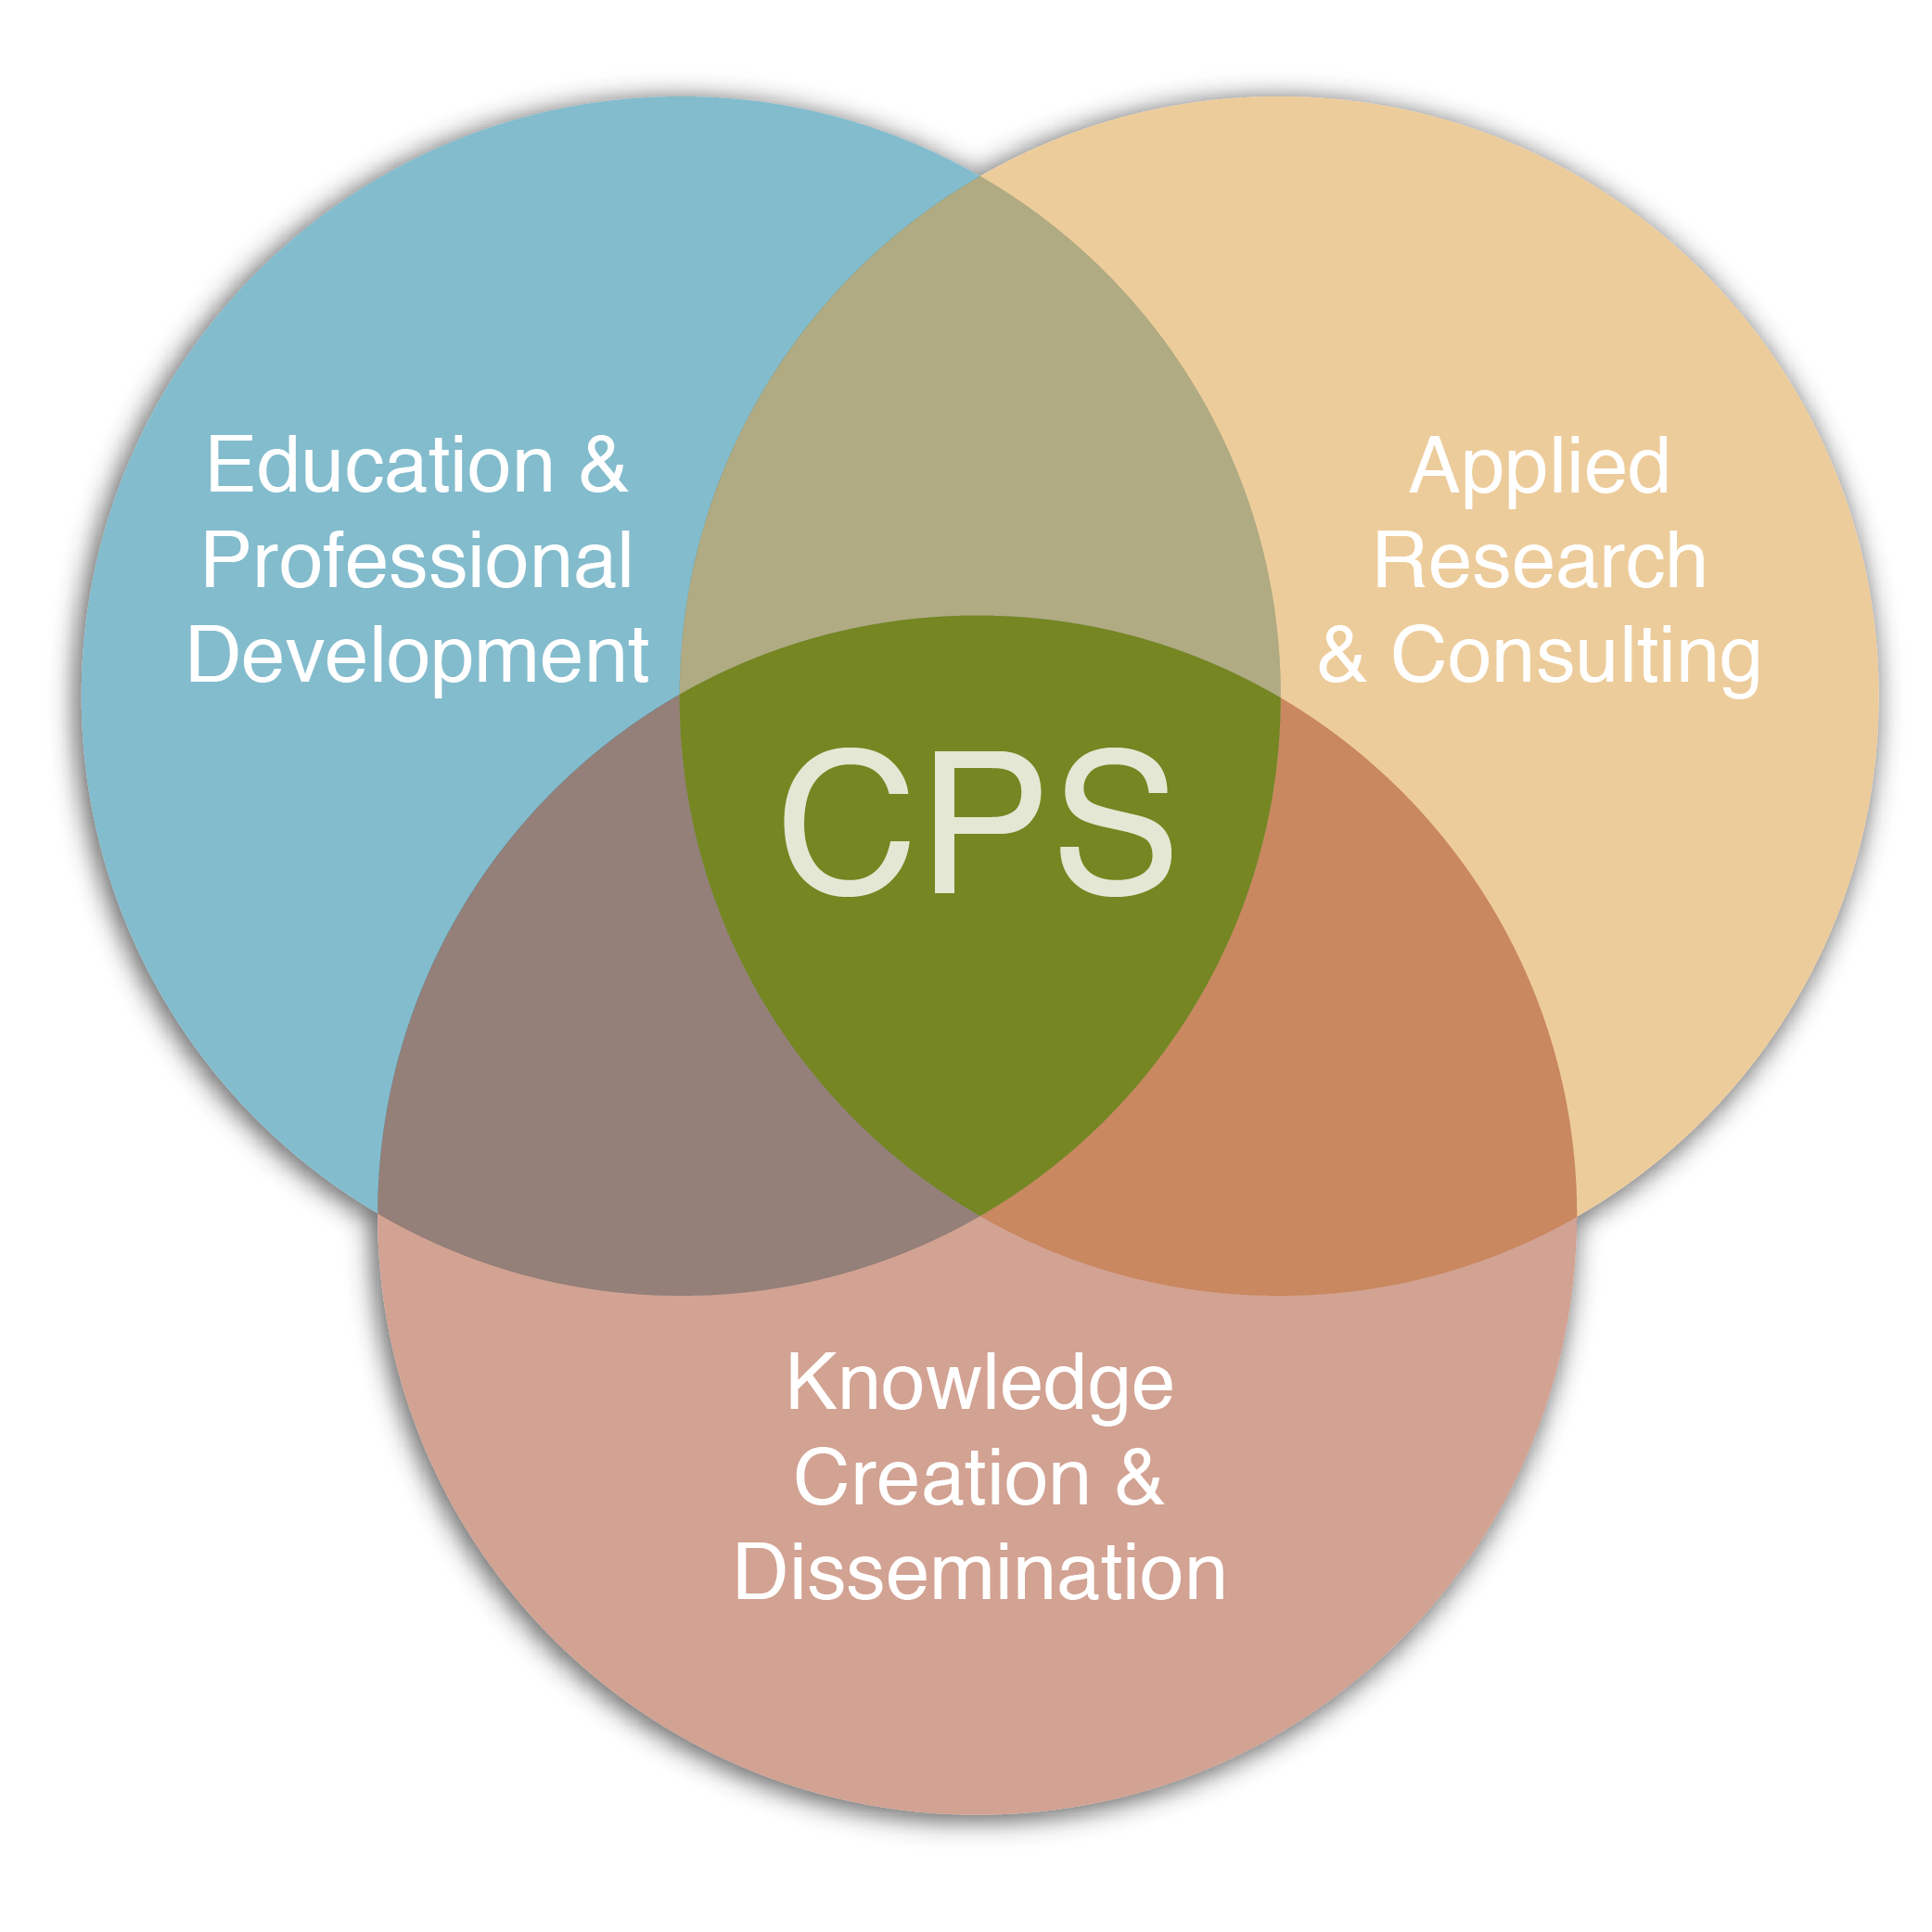 center for public service is the center for education and professional development, applied research and consulting, and knowledge creation and dissemination